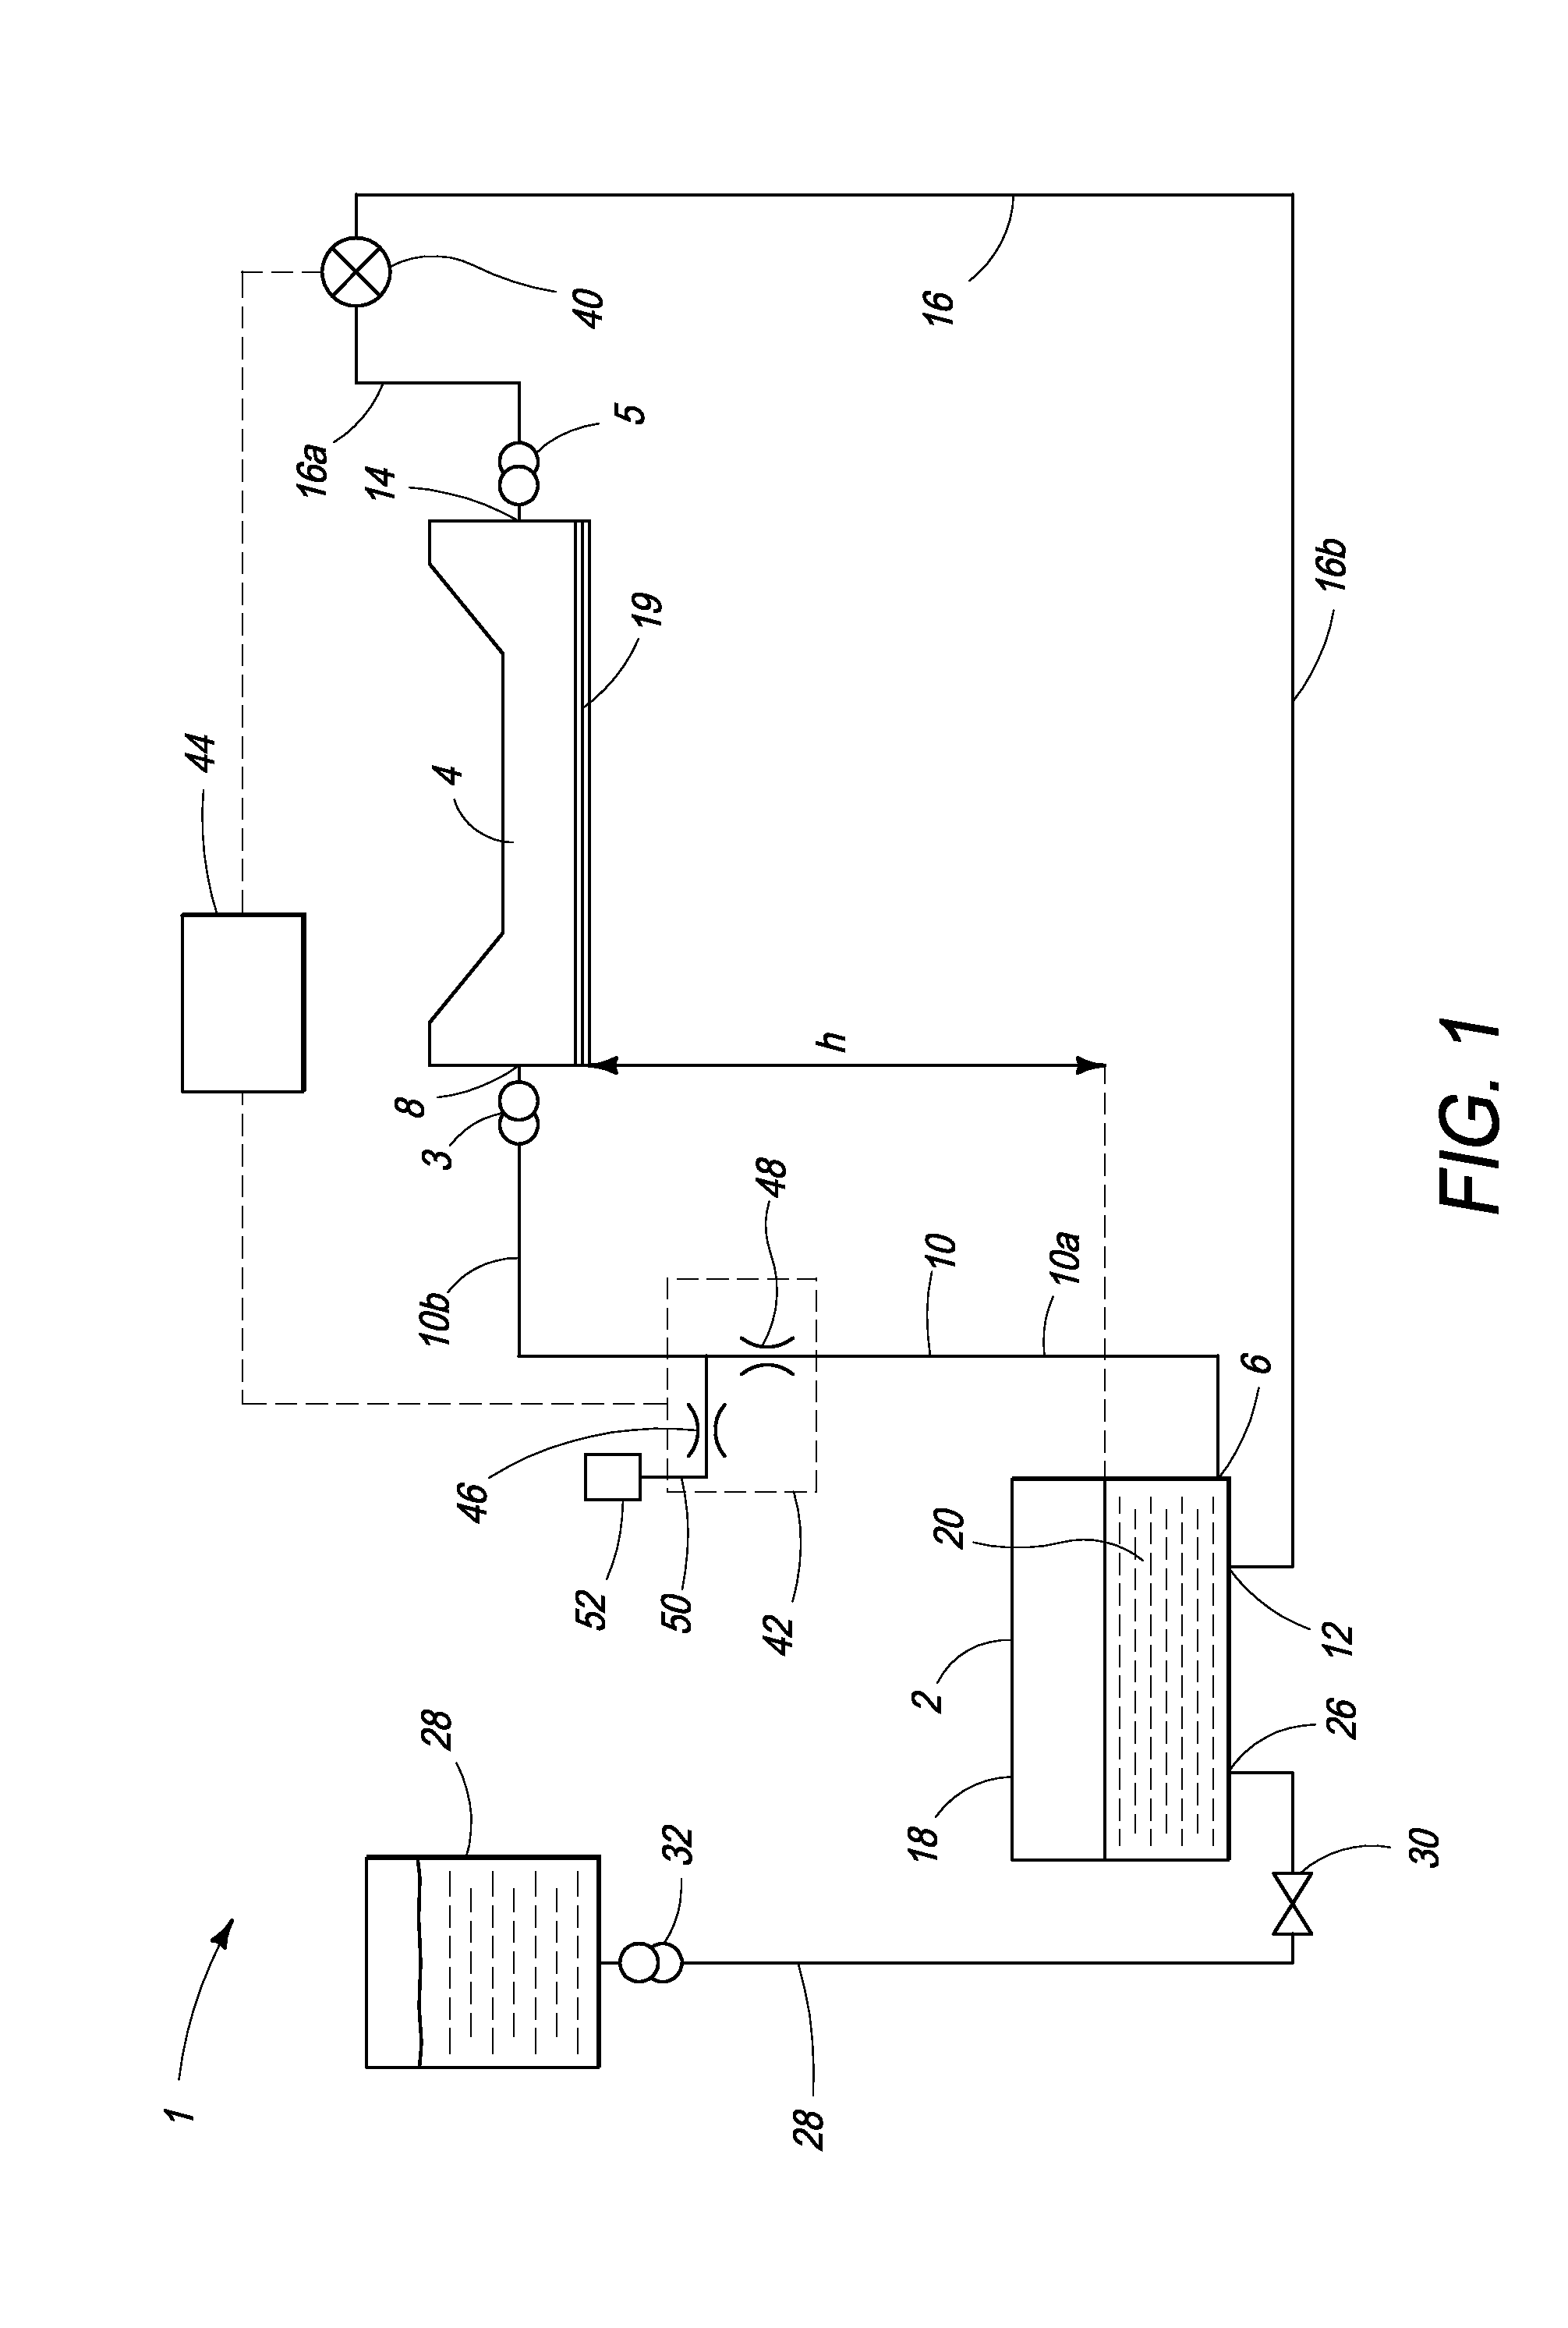 Method of removing air bubbles from circulating ink delivery system